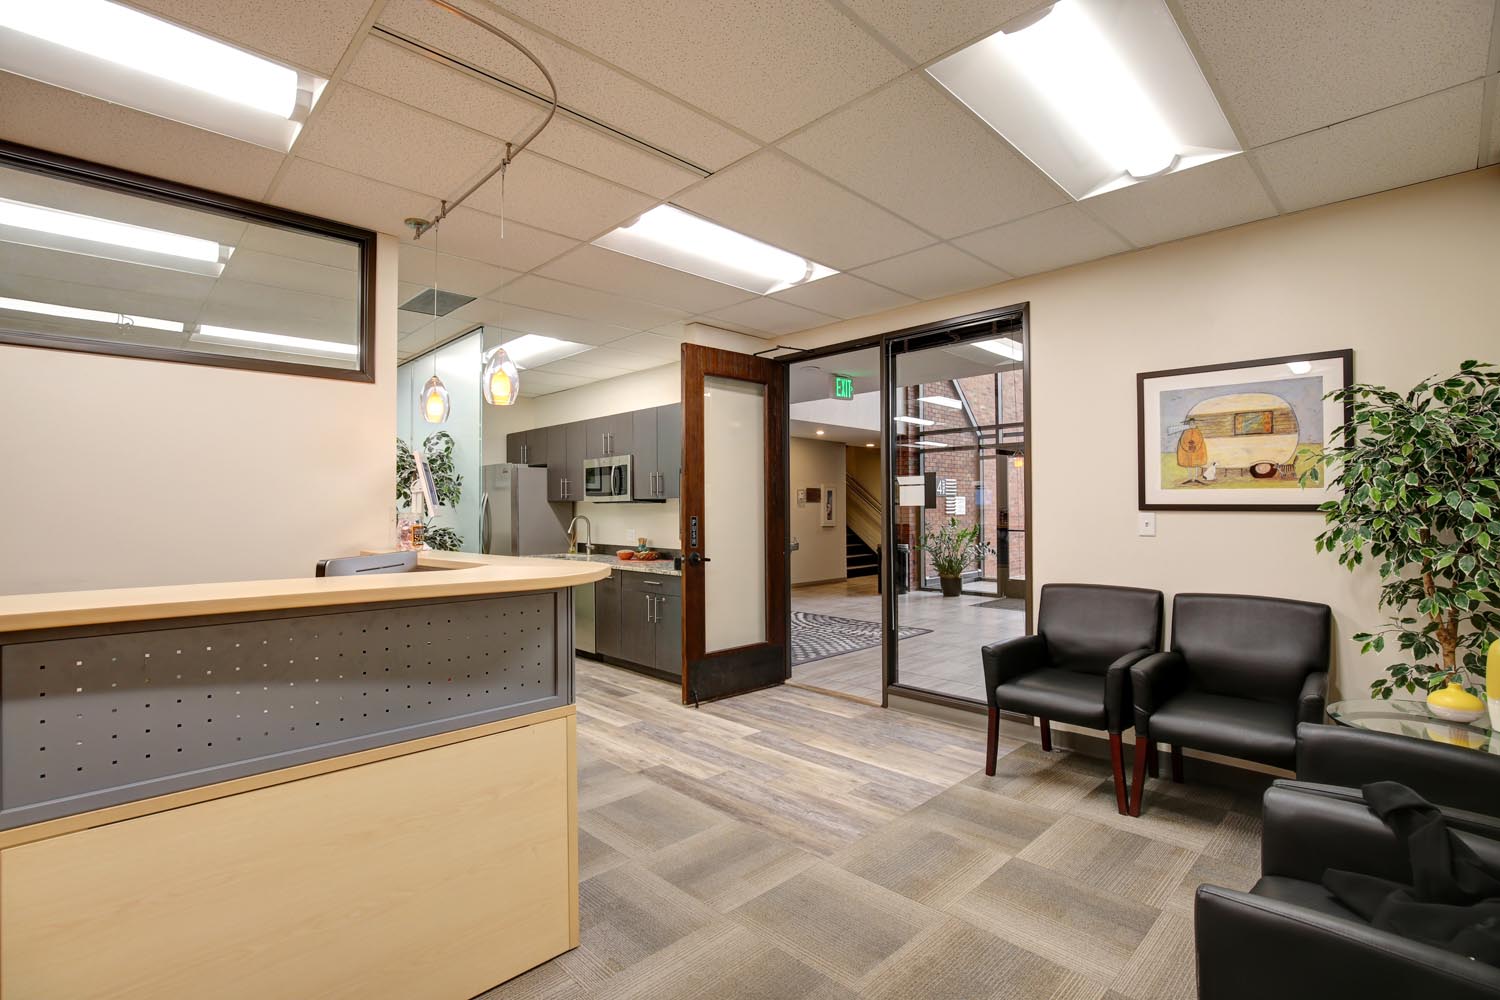 Littleton Colorado Office Space for Rent, Coworking